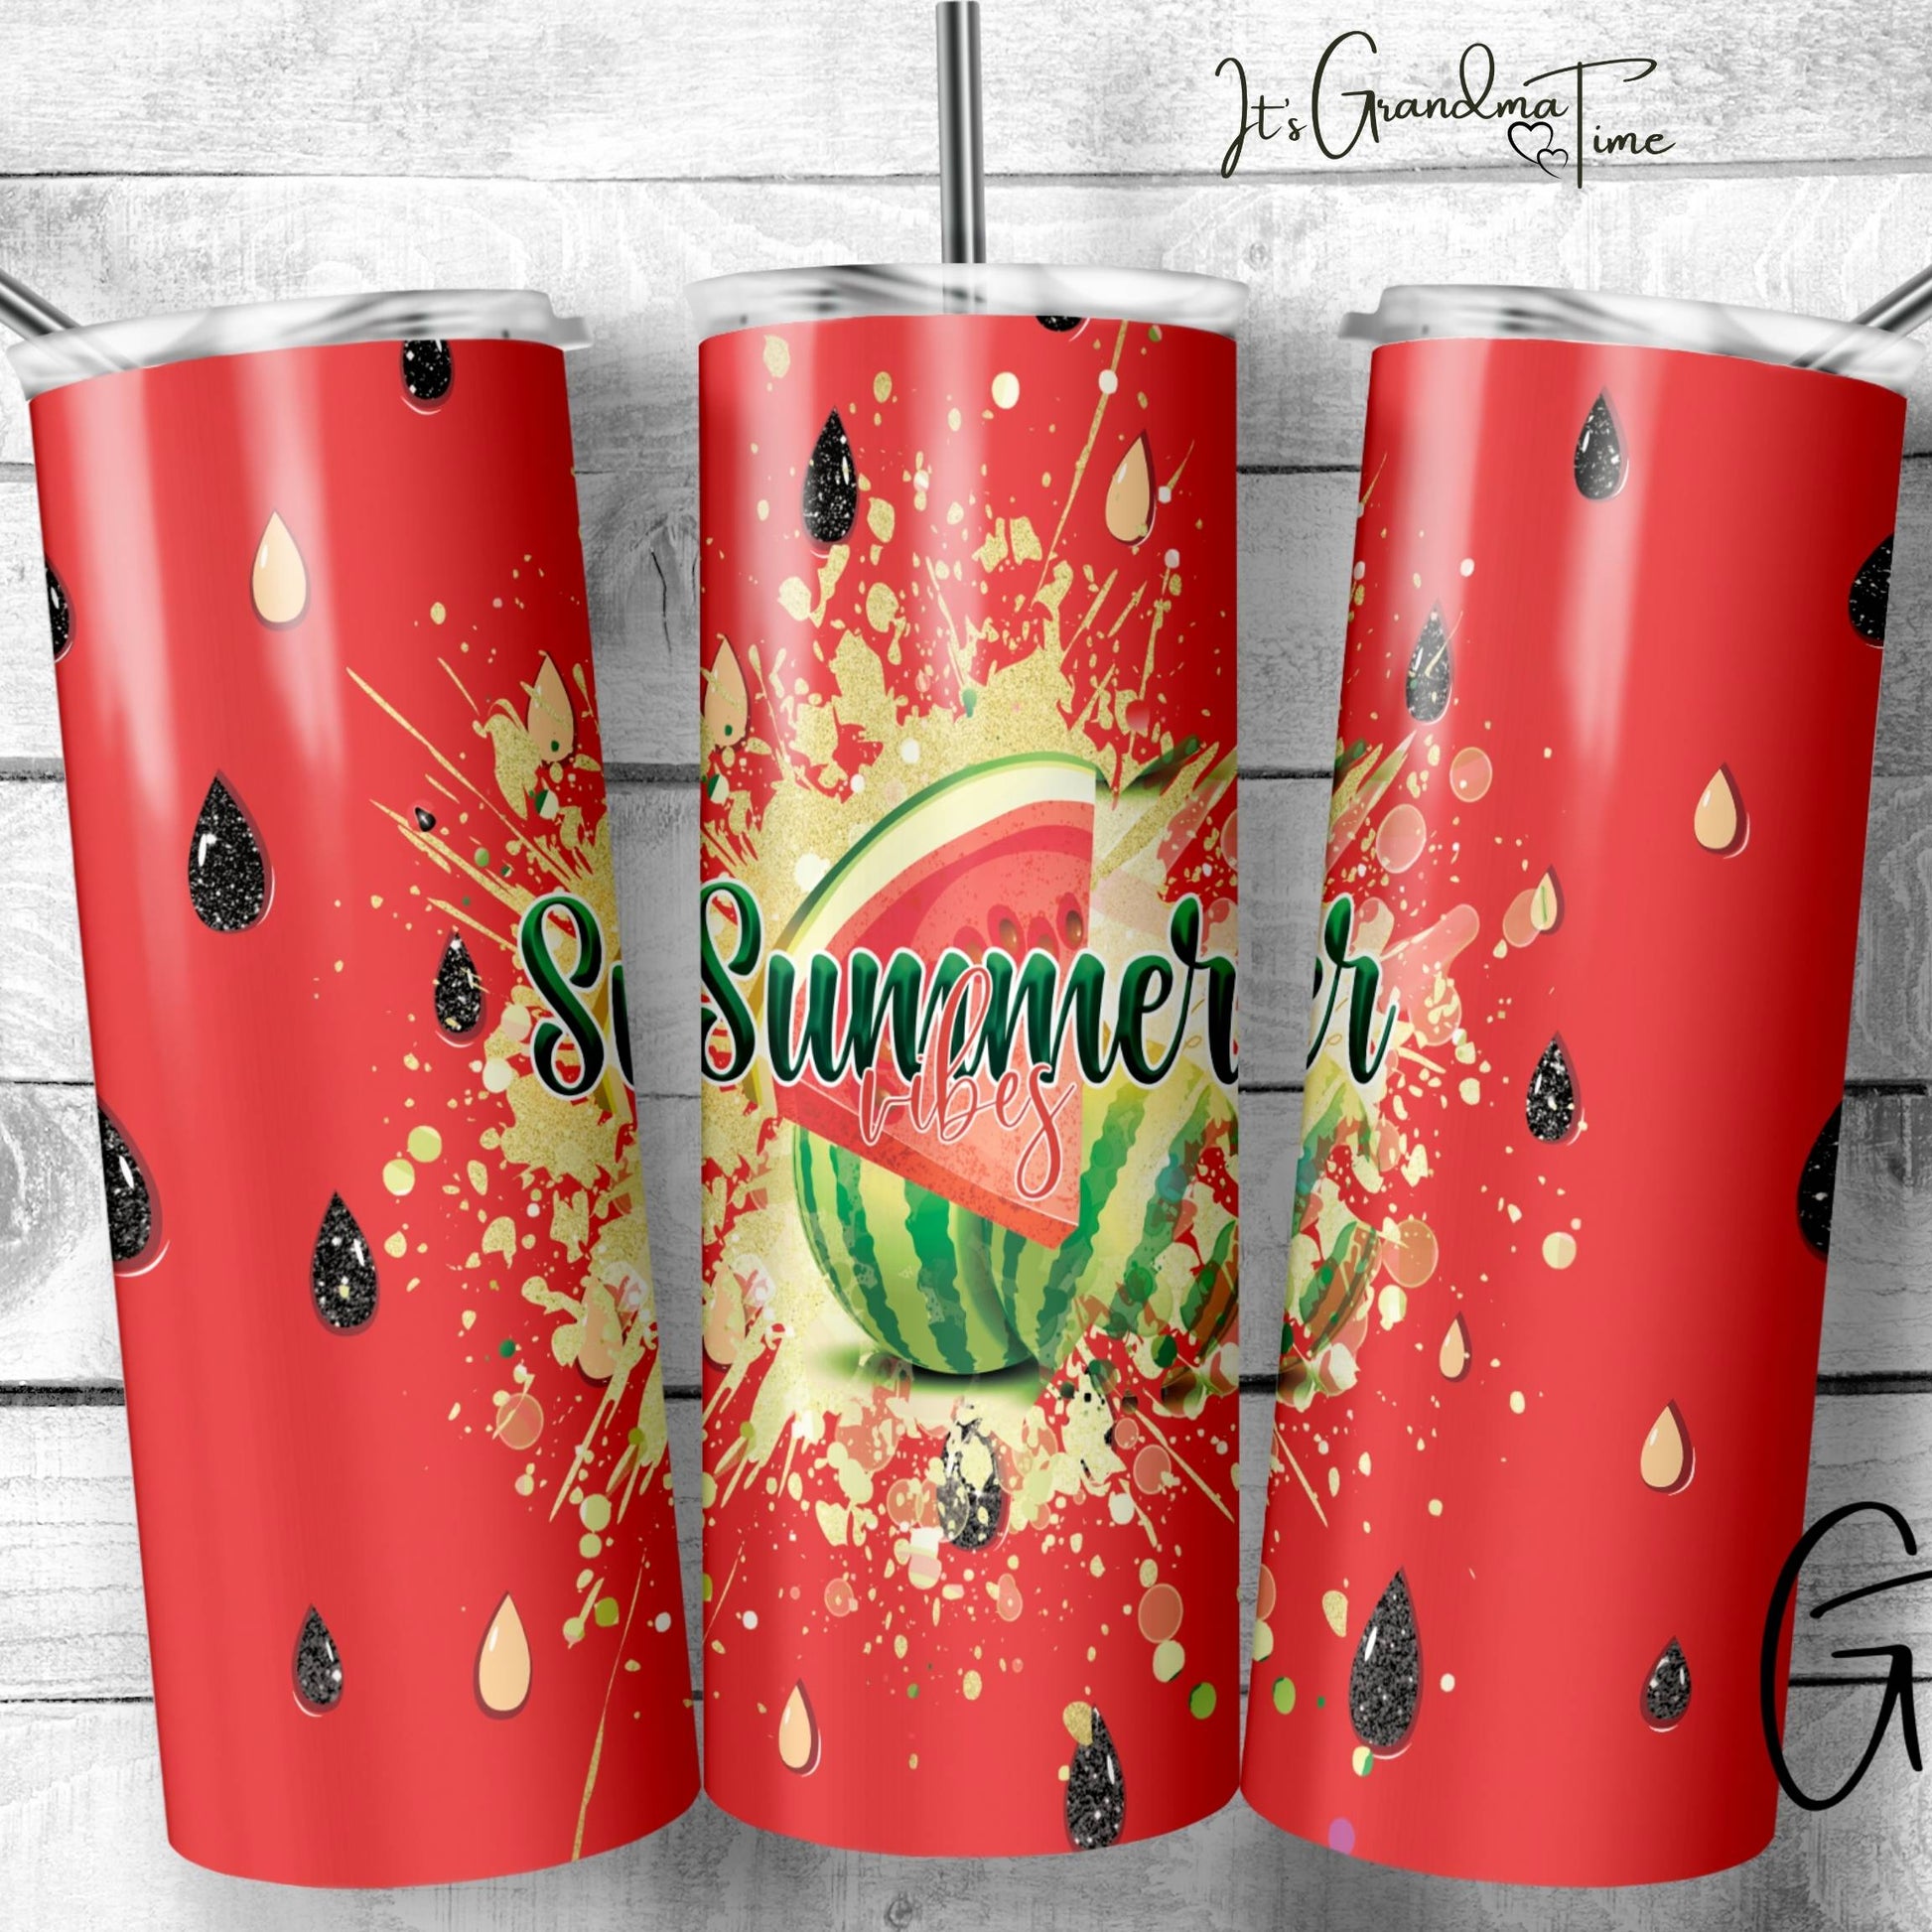 Watermelon Tumbler with Summer Vibes written